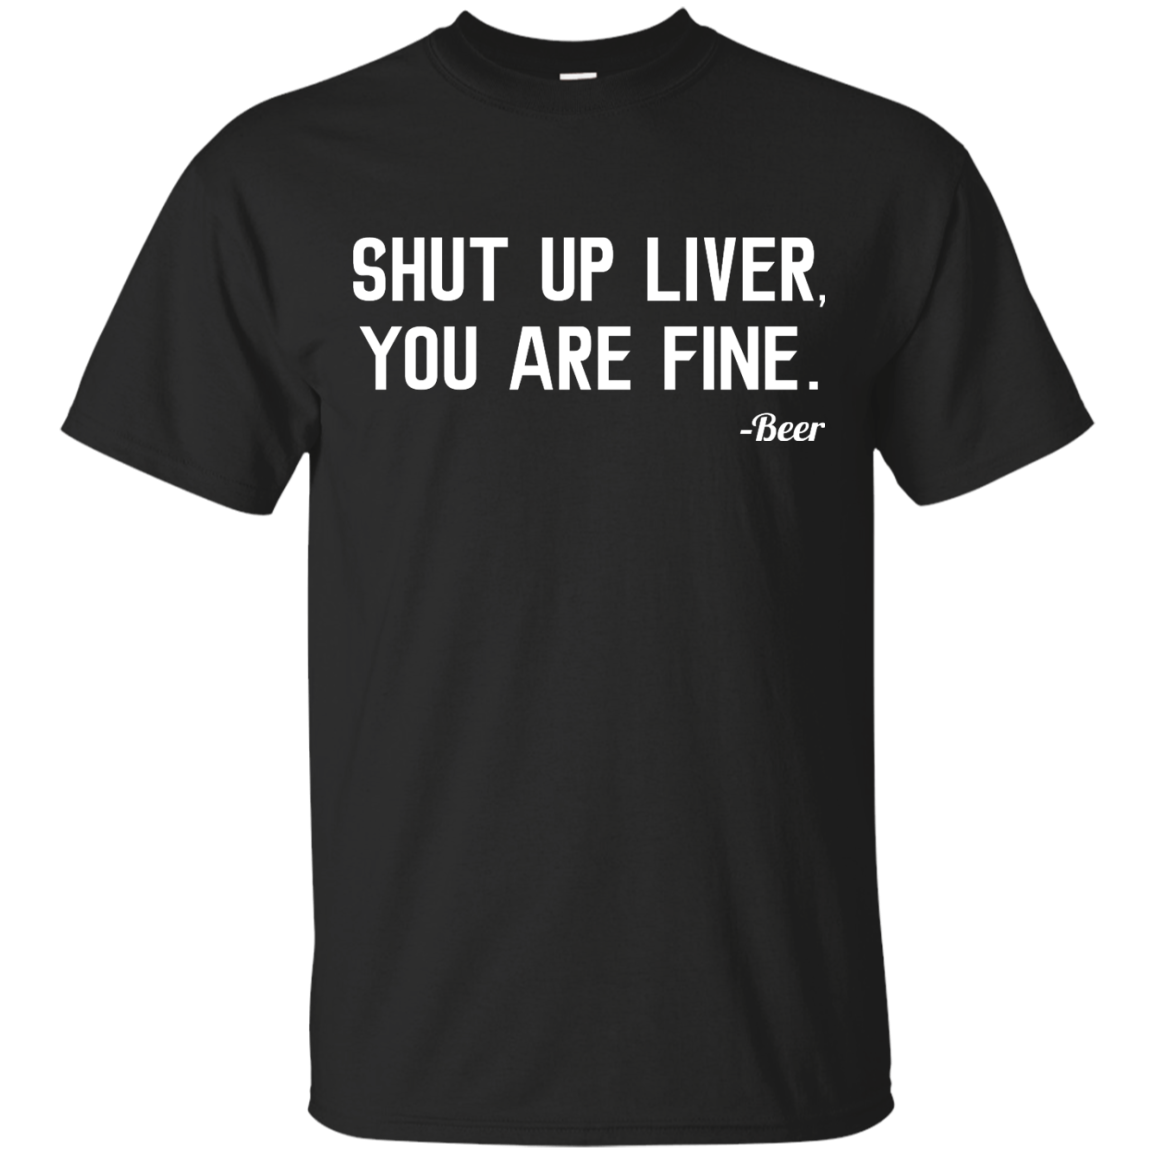 Shut Up Liver You Are Fine shirt, hoodie, tank